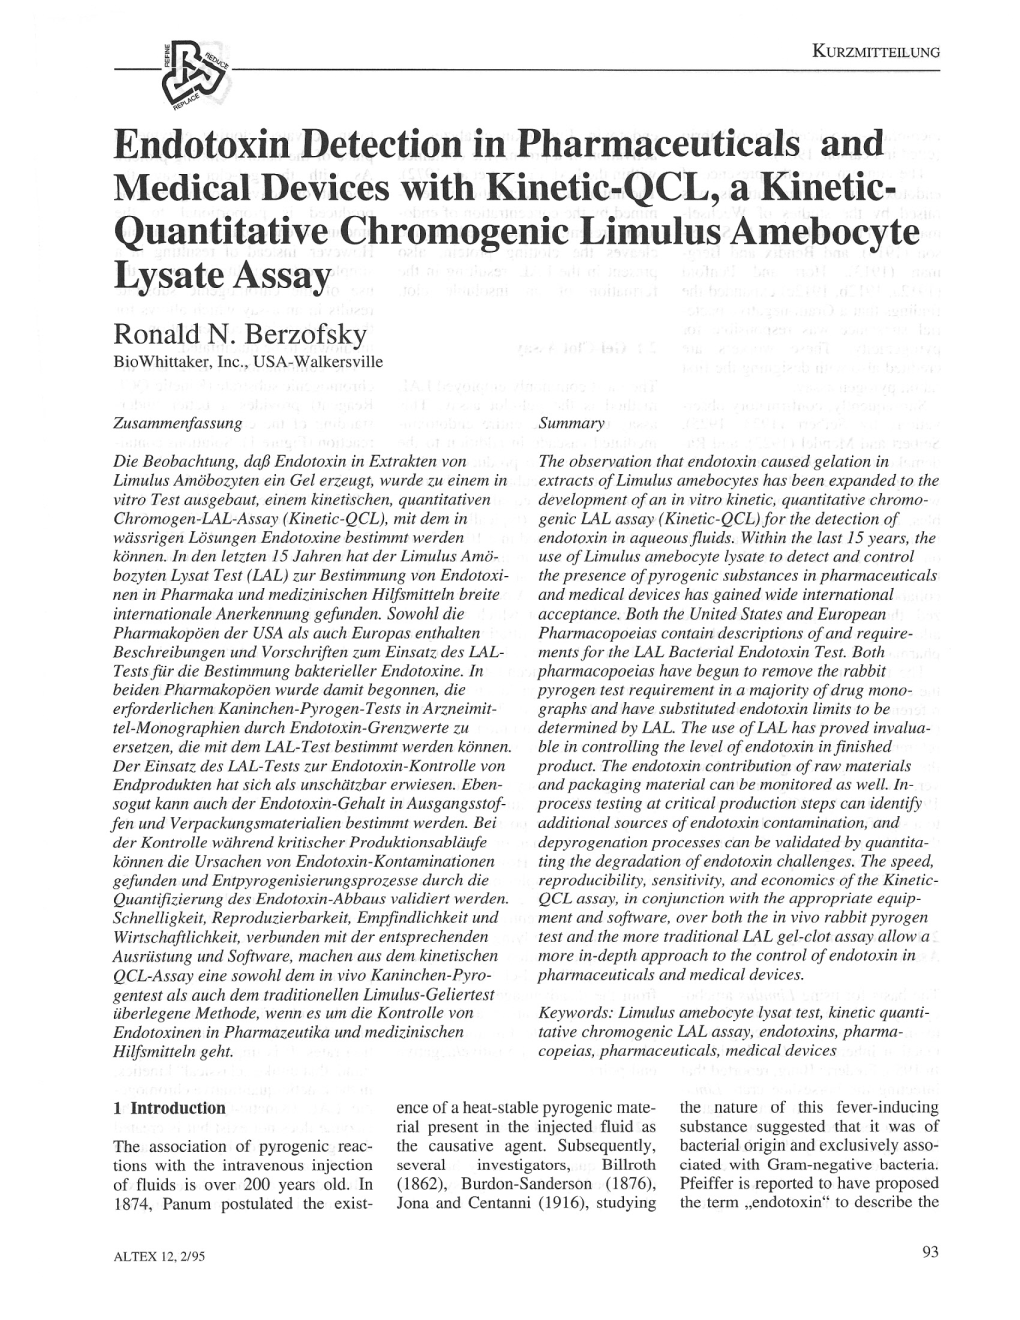 Endotoxin Detection in Pharmaceuticals and Medical Devices with Kinetic-QCL, a Kinetic- Quantitative Chromogenic Limulus Amebocyte Lysate Assay